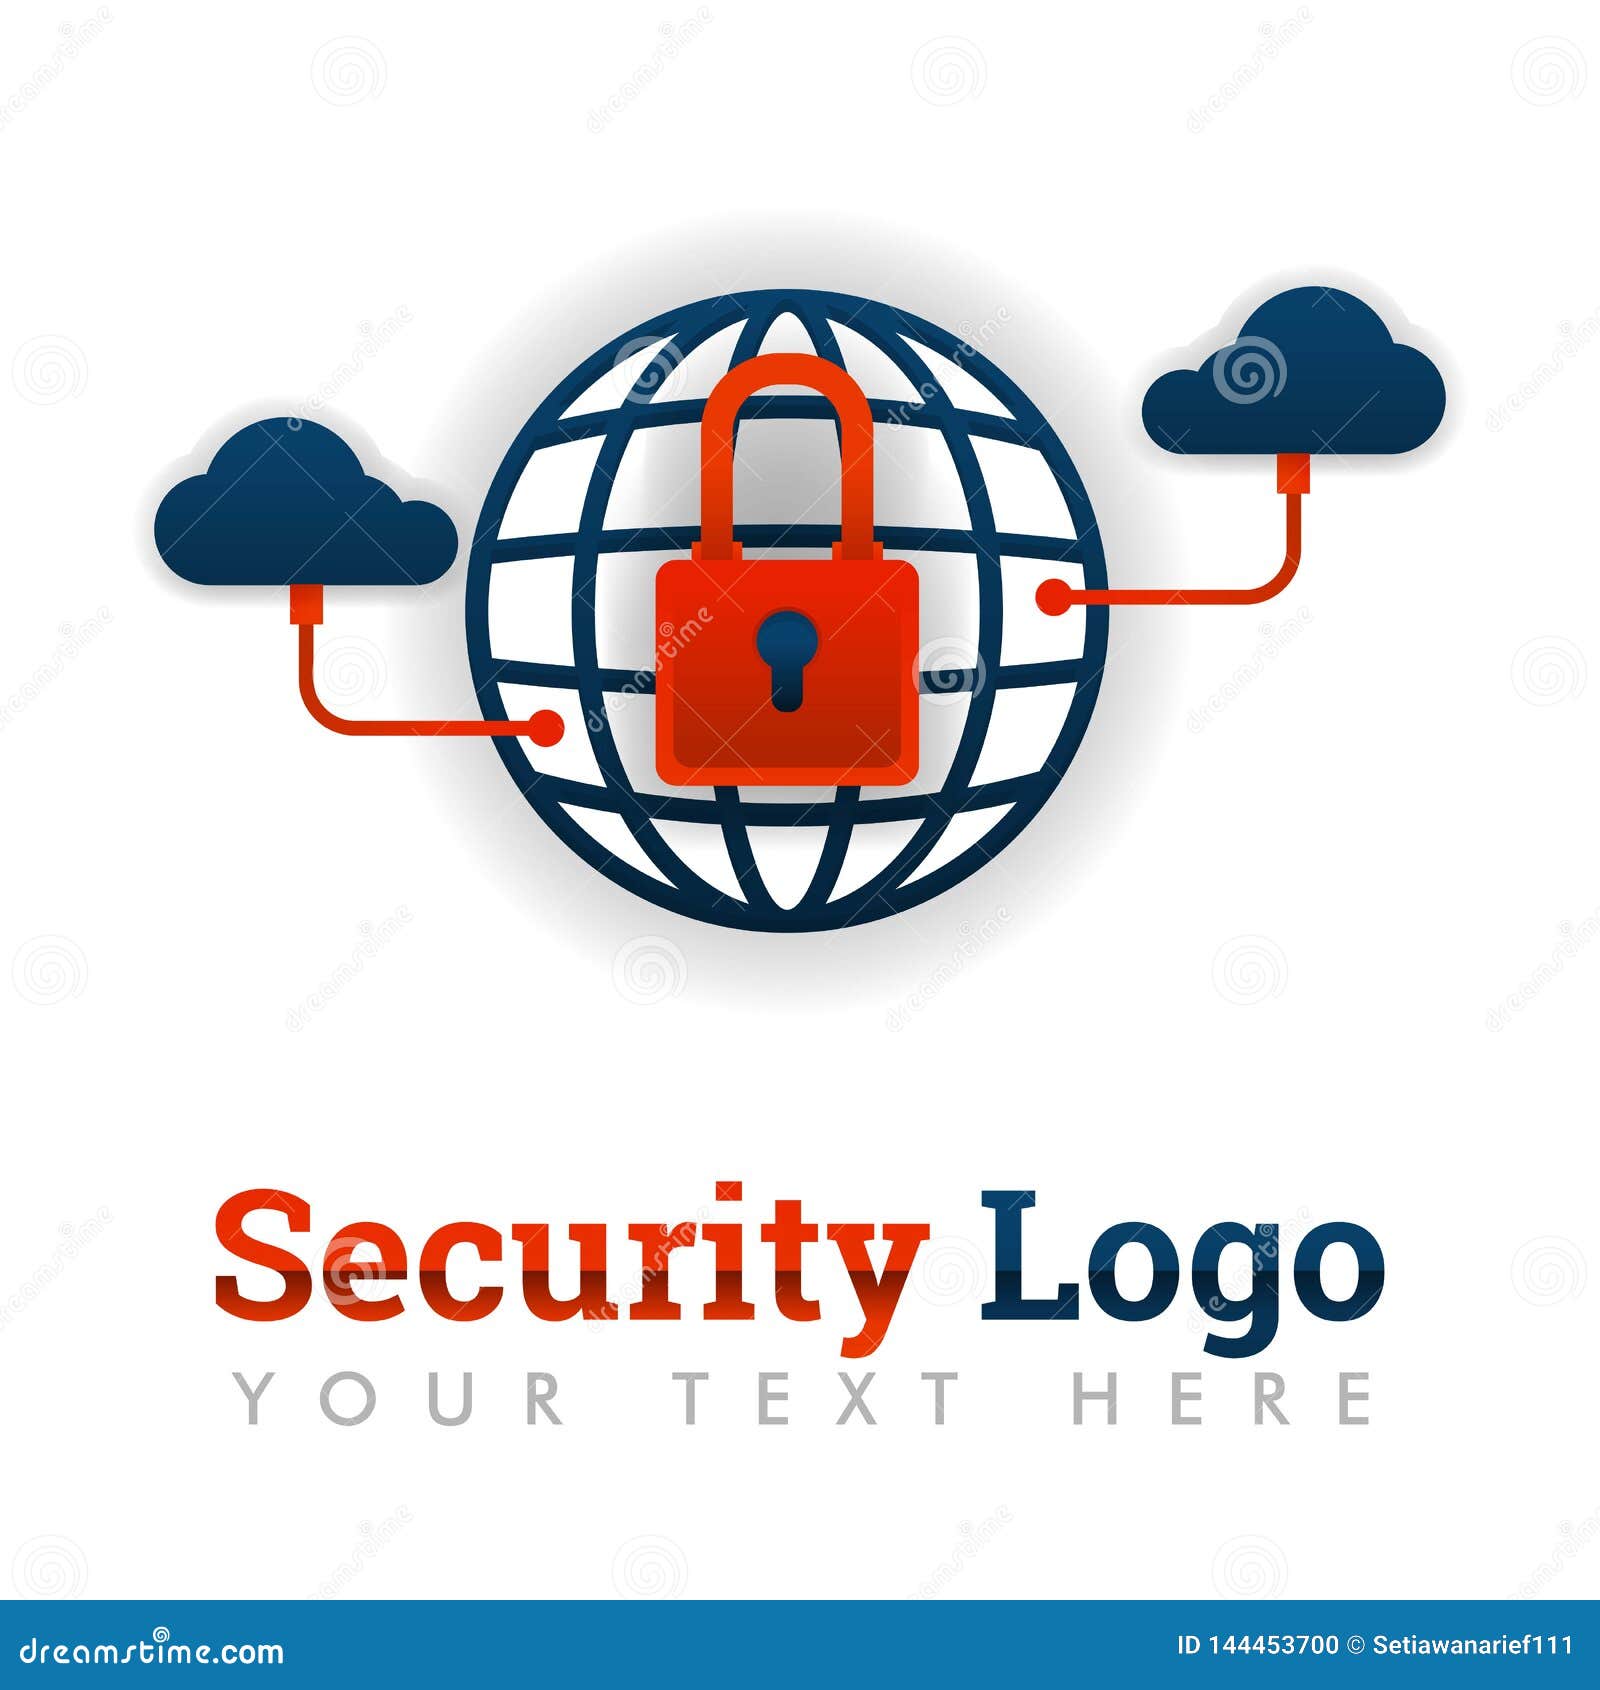 security logo template for storage, warehouse, network, service providers, internet, technology, start up, online, mobile apps, so